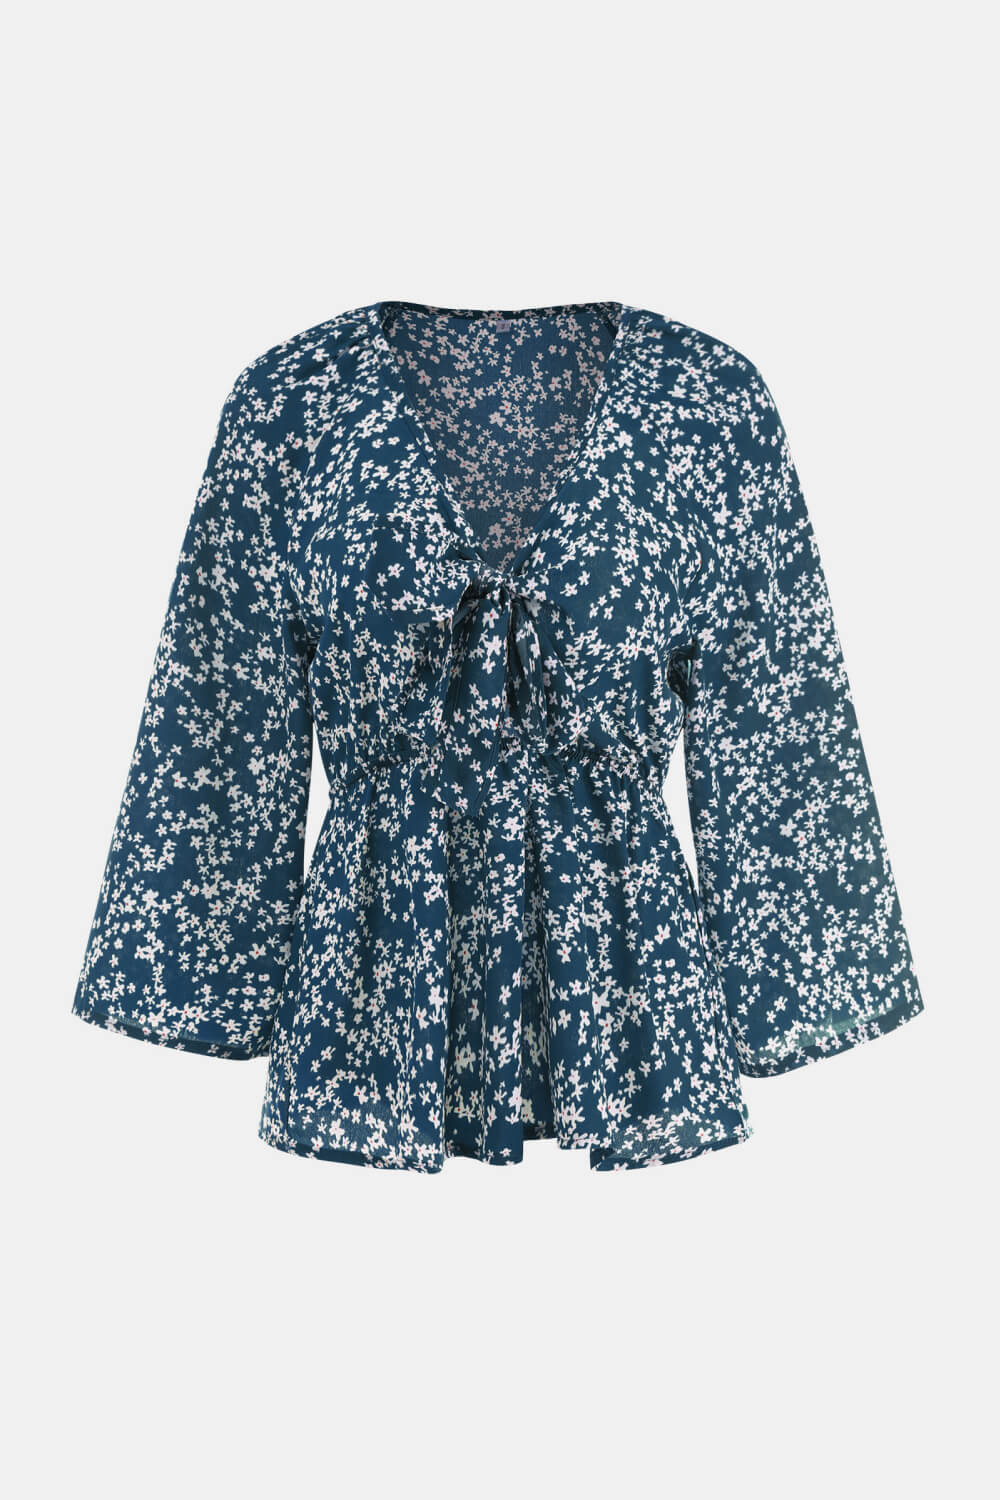 Ditsy Floral Tie-Front Peplum Blouse